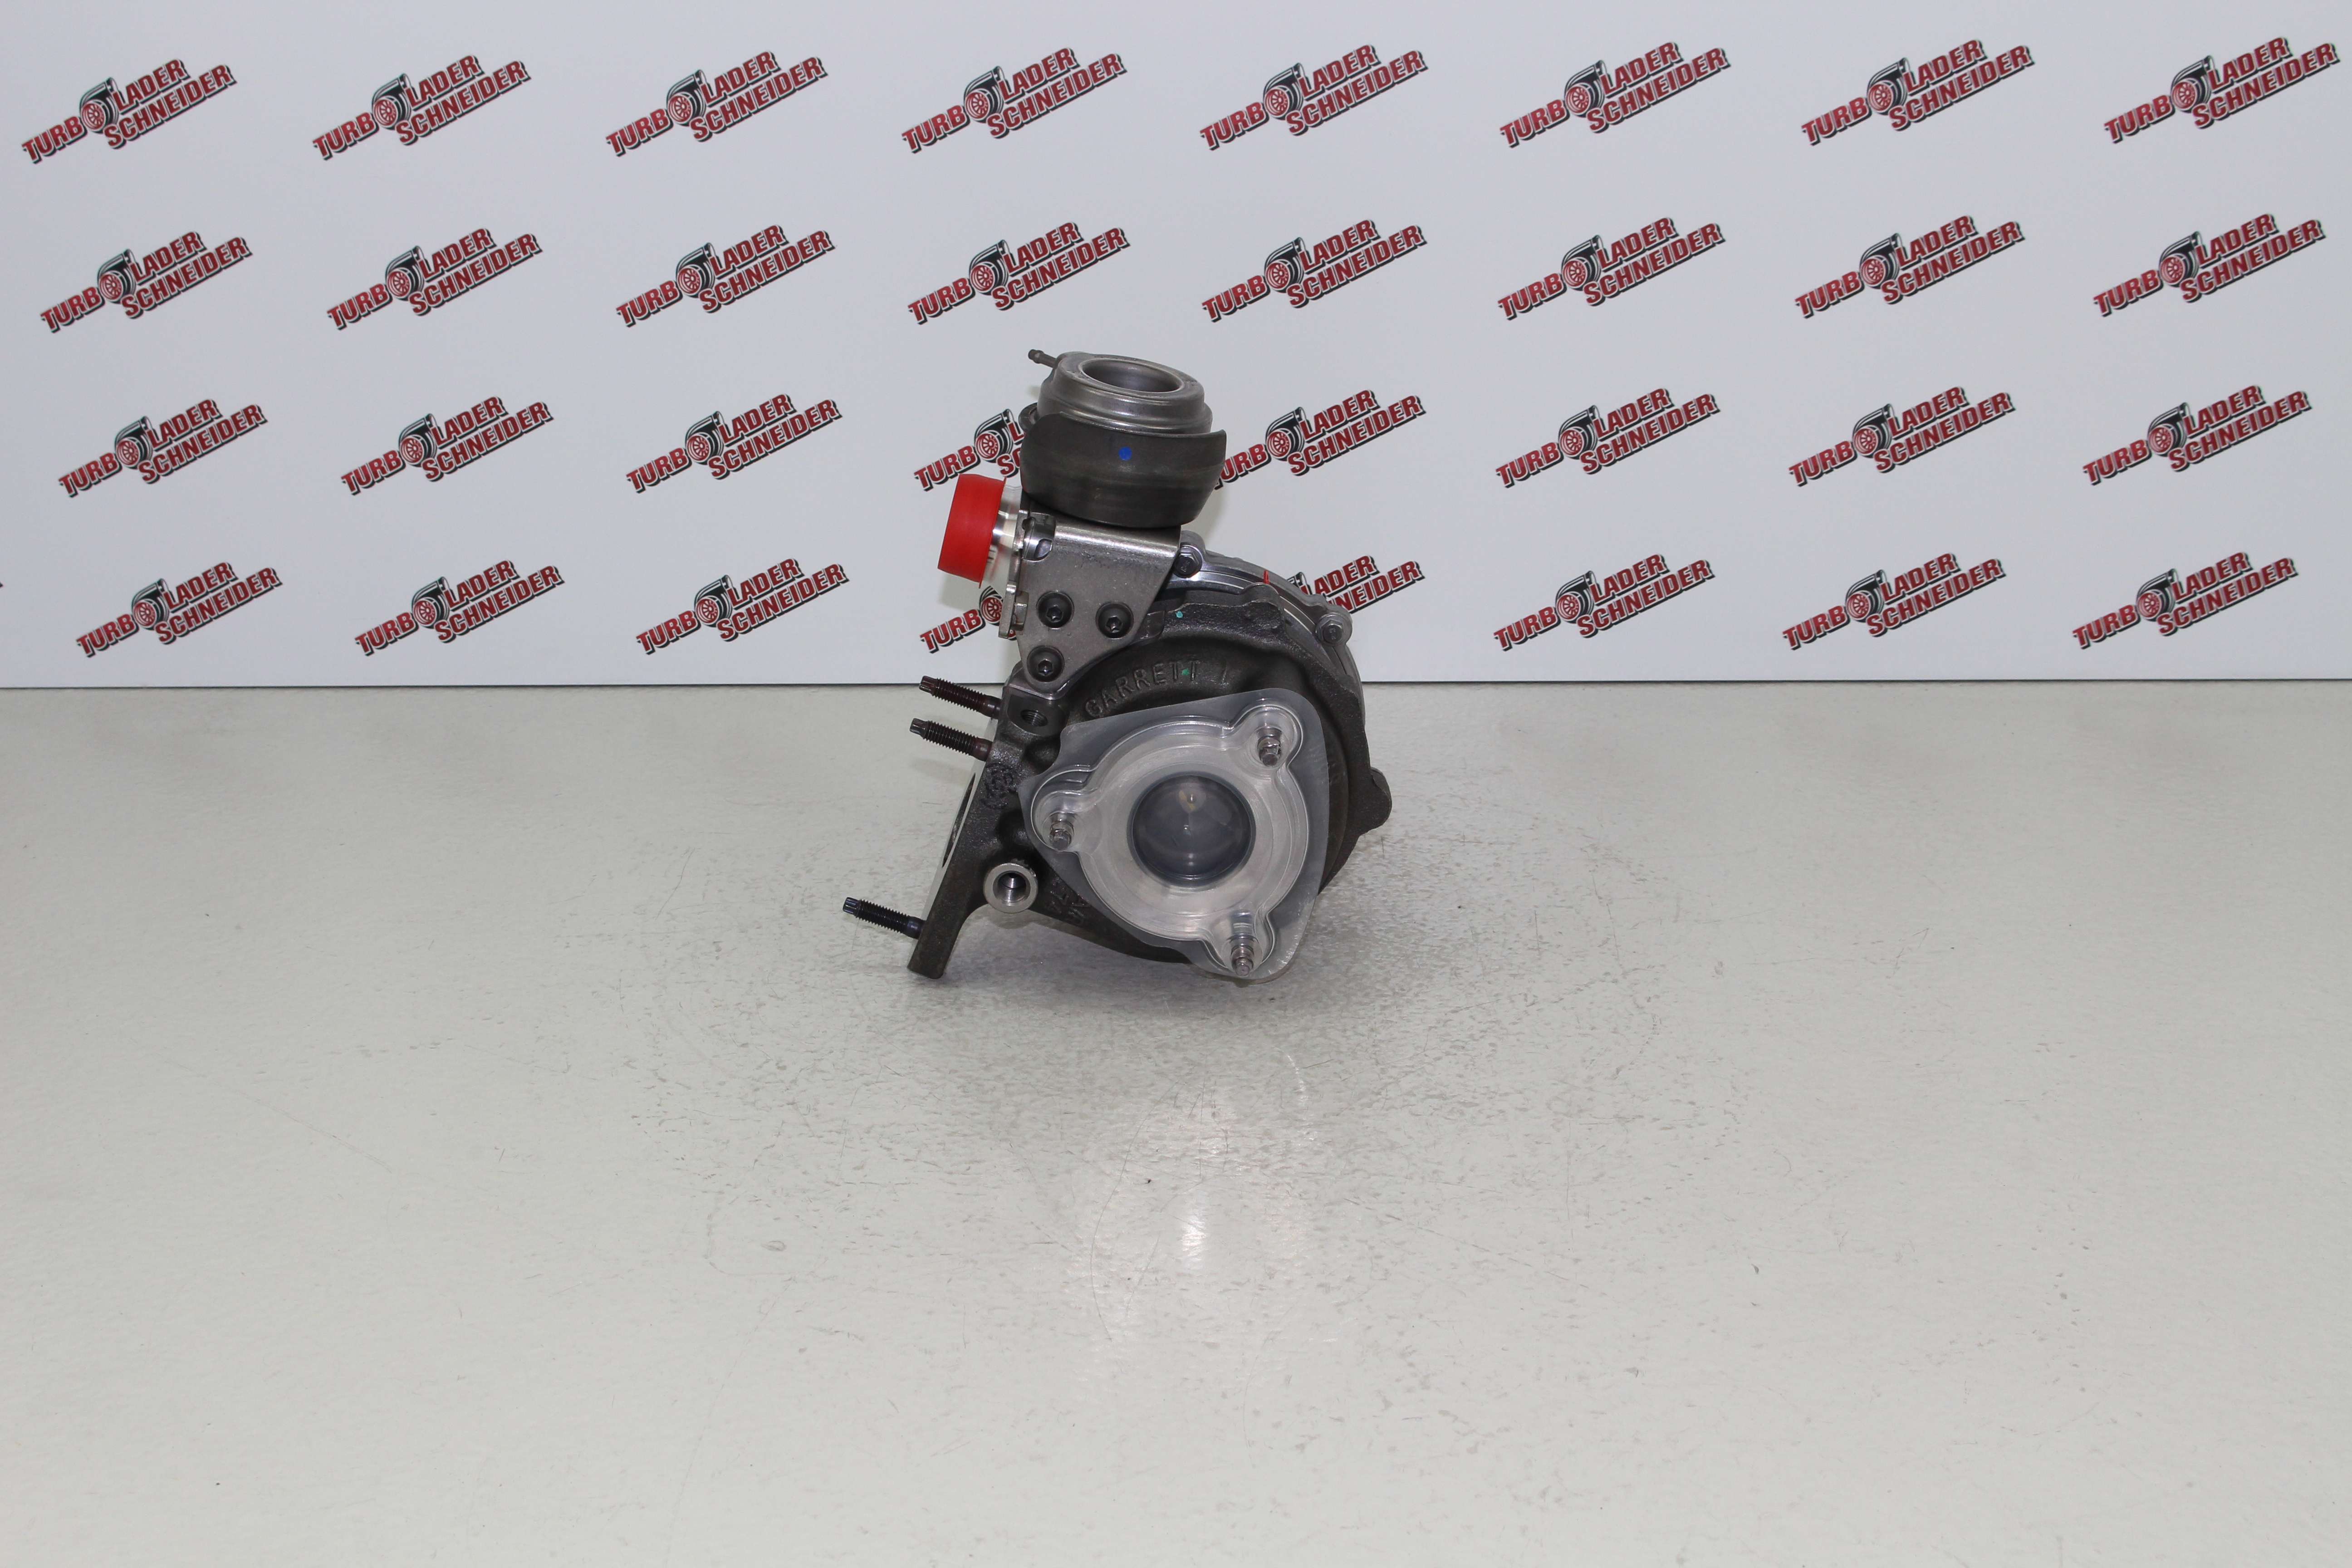 Turbolader Nissan/Opel/Renault 2.3 CDTI/dCi 92-110 Kw